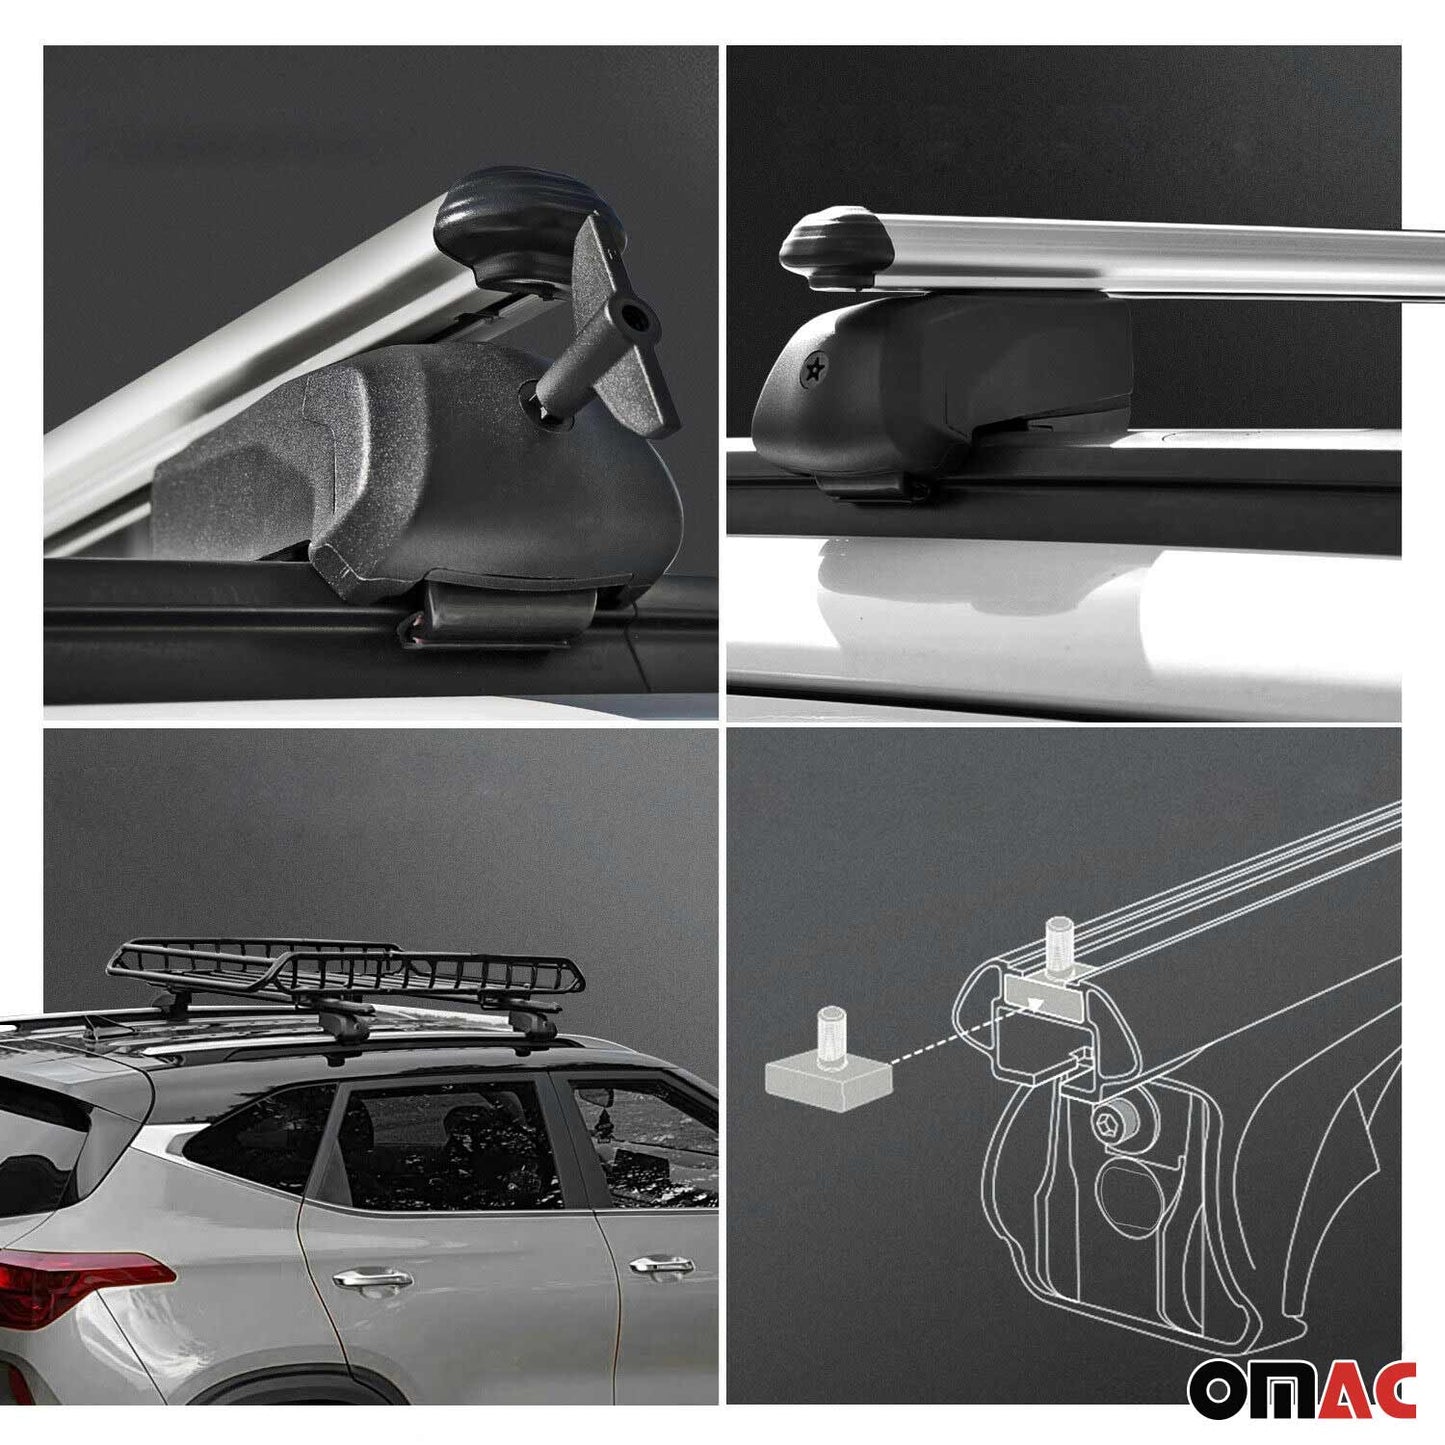 OMAC Lockable Roof Rack Cross Bars Luggage Carrier for Subaru Solterra 2023-2024 Gray G003041